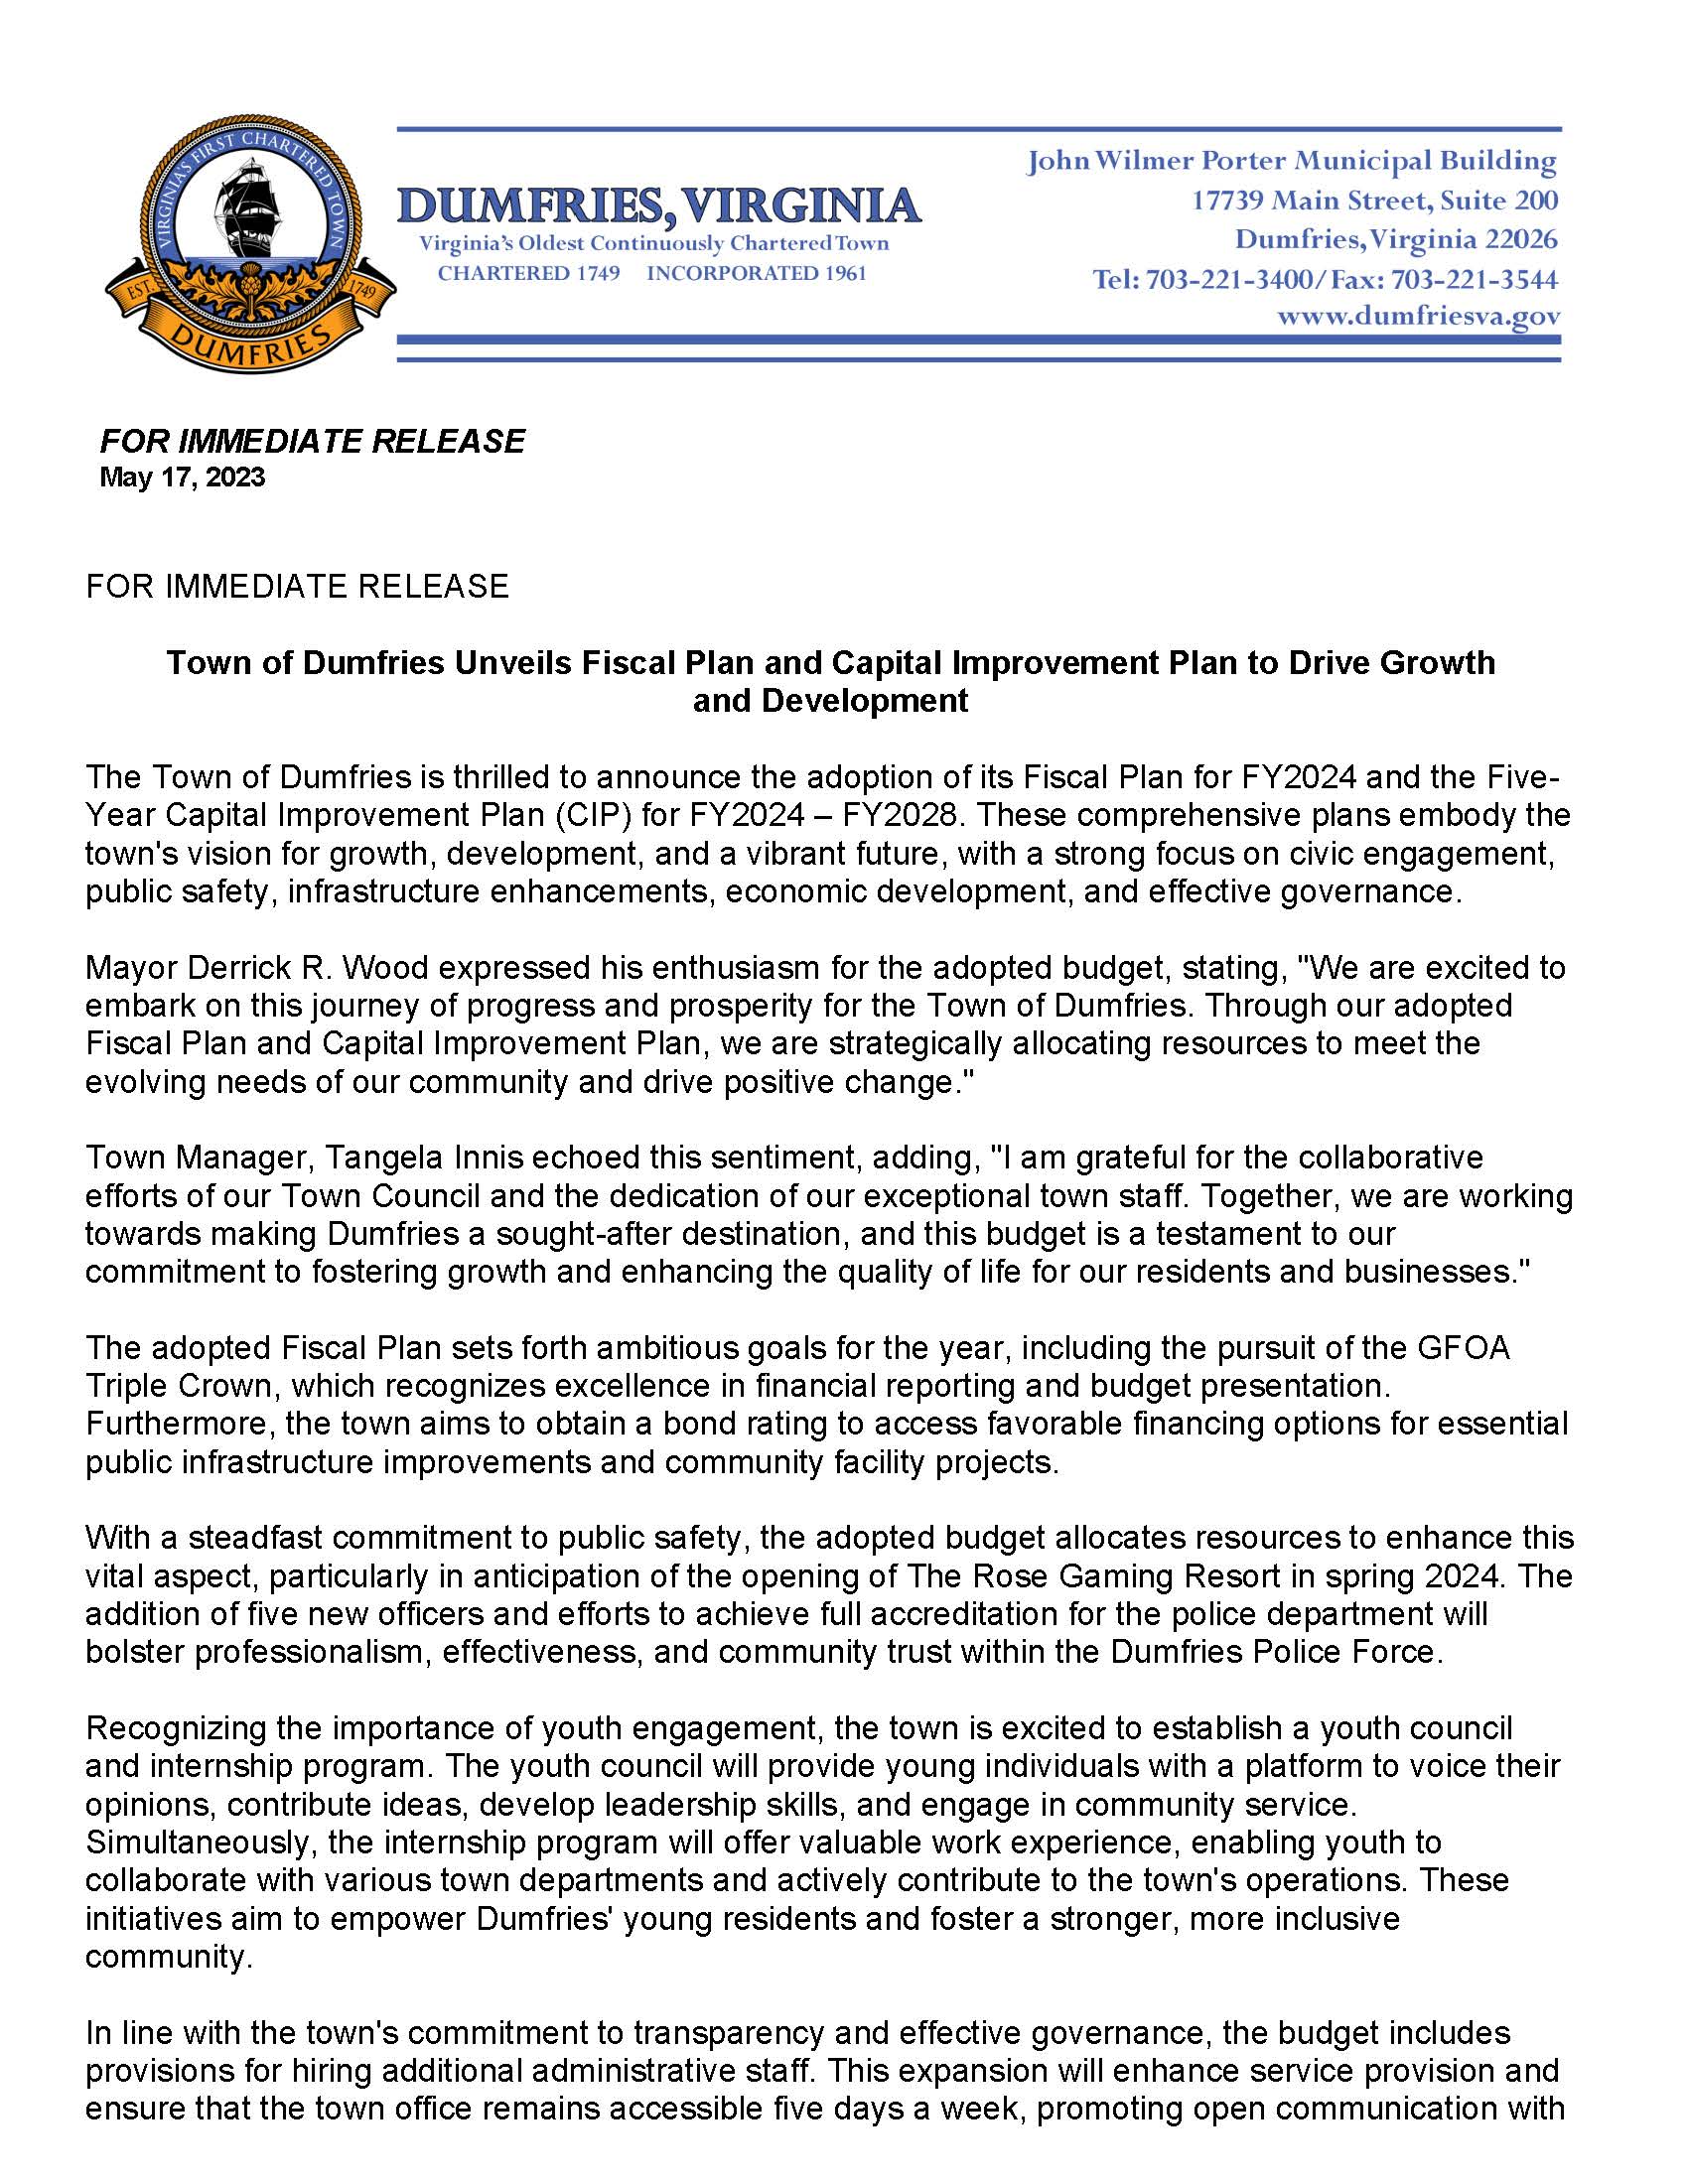 Dumfries Town Council Adopts FY24 Fiscal Plan_Page_1